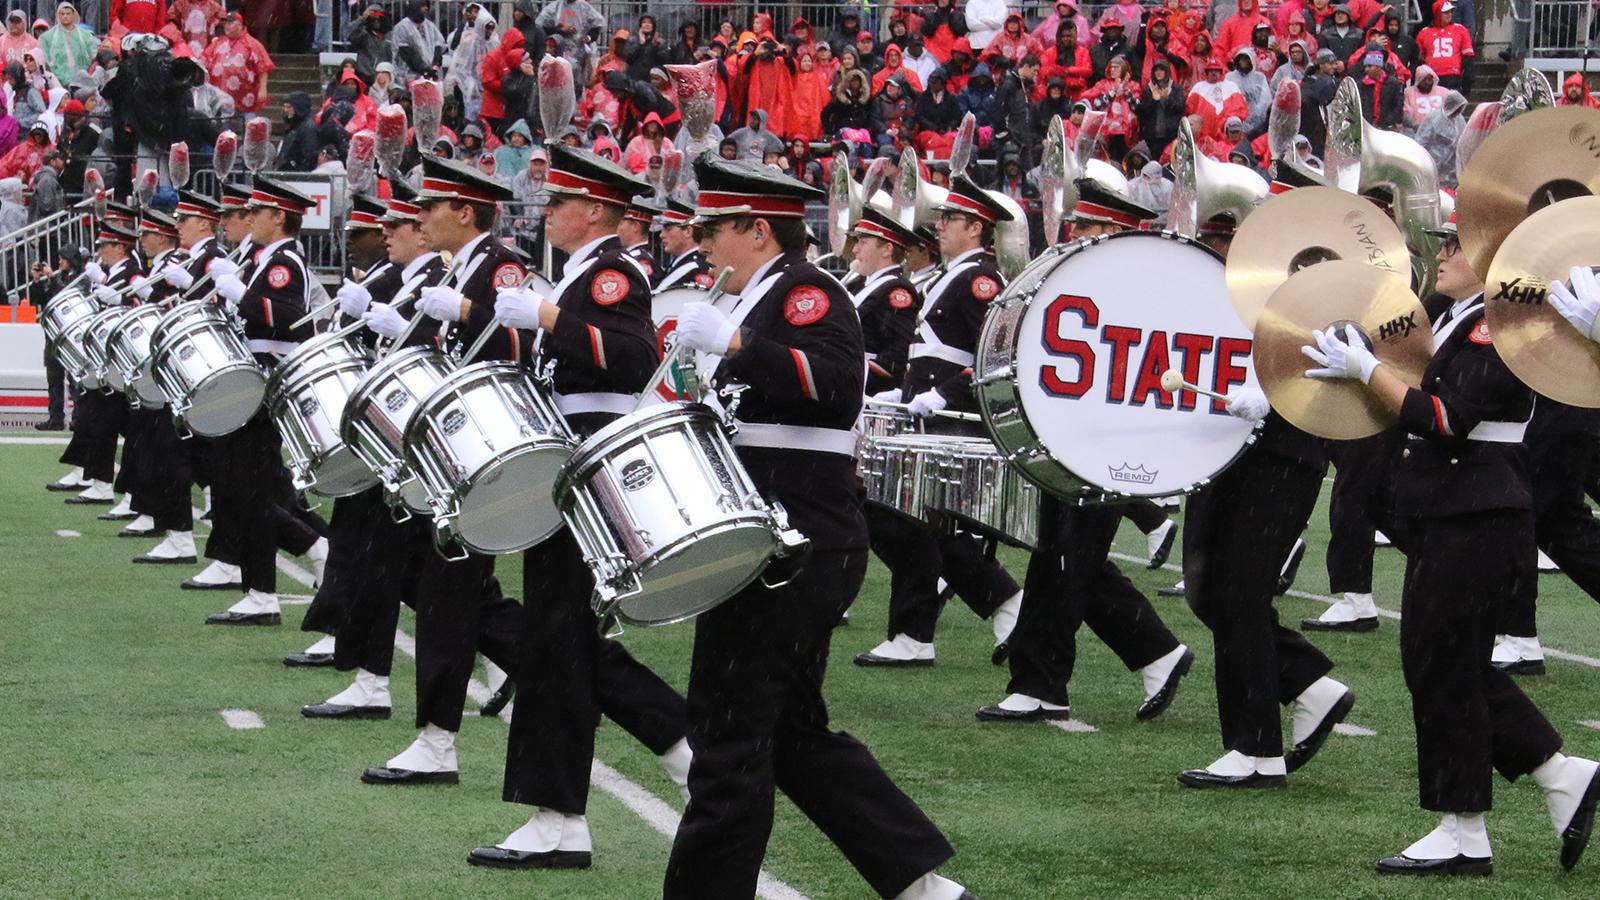 Drumline performs at an Ohio State football game